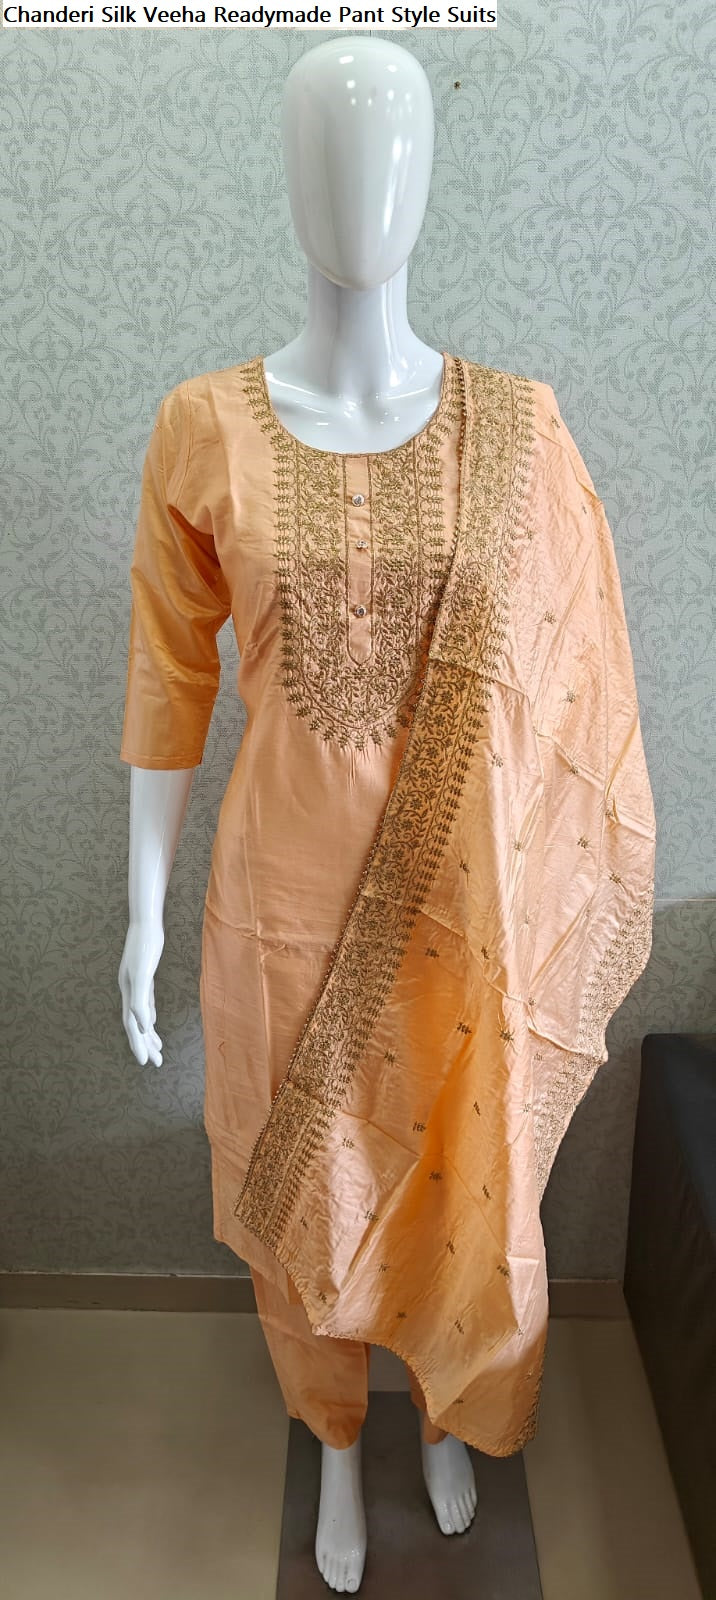 Chanderi Silk Veeha Readymade Pant Style Suits